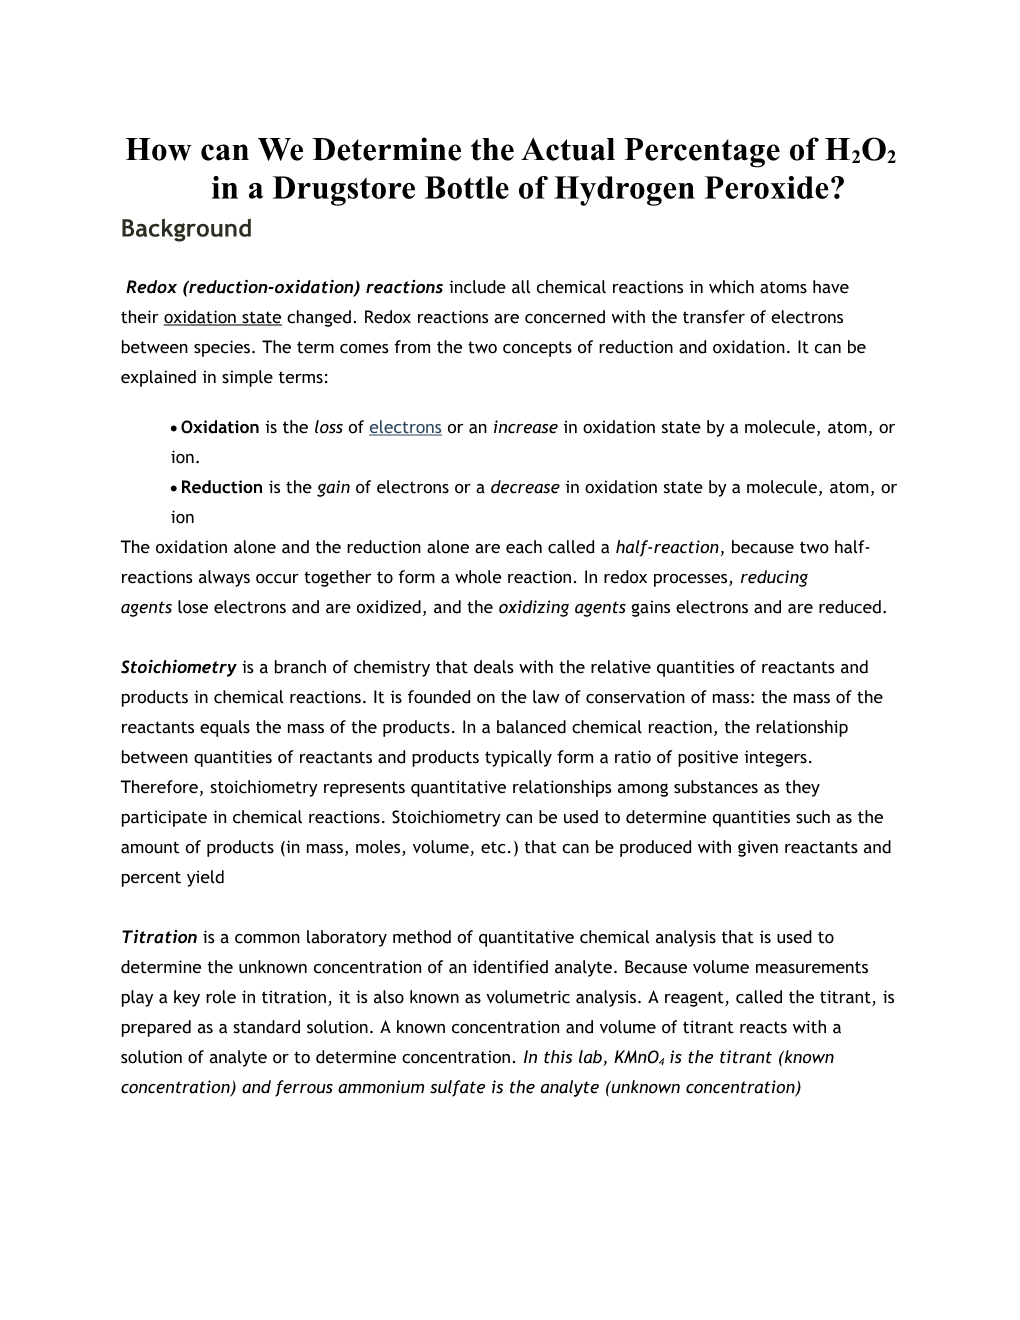 How Can We Determine the Actual Percentage of H2O2 in a Drugstore Bottle of Hydrogen Peroxide?